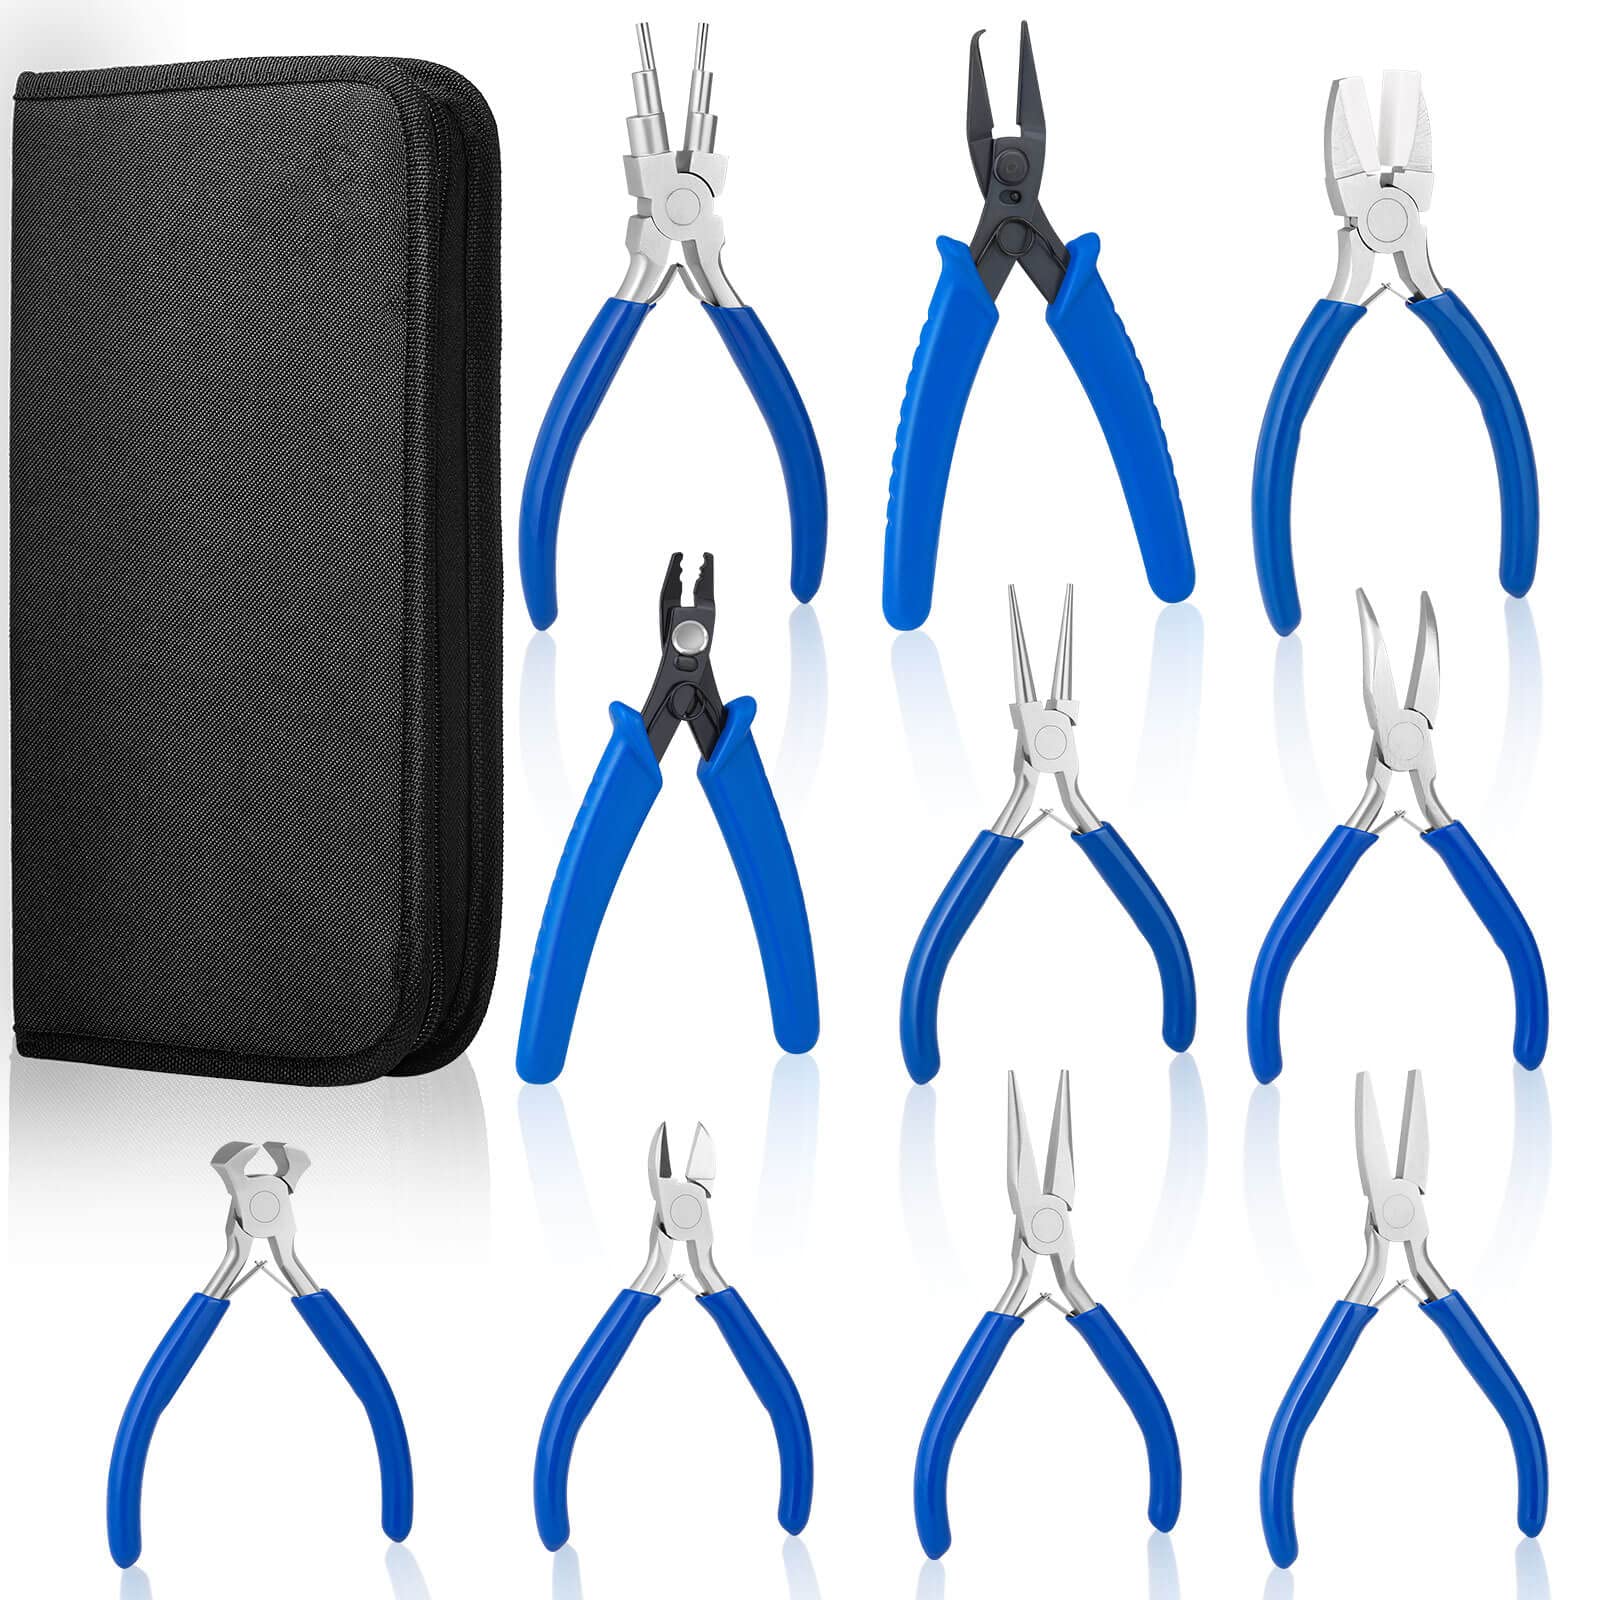 5 Piece Mini Pliers Set Jewelers Beading Wire Wrapping Tool